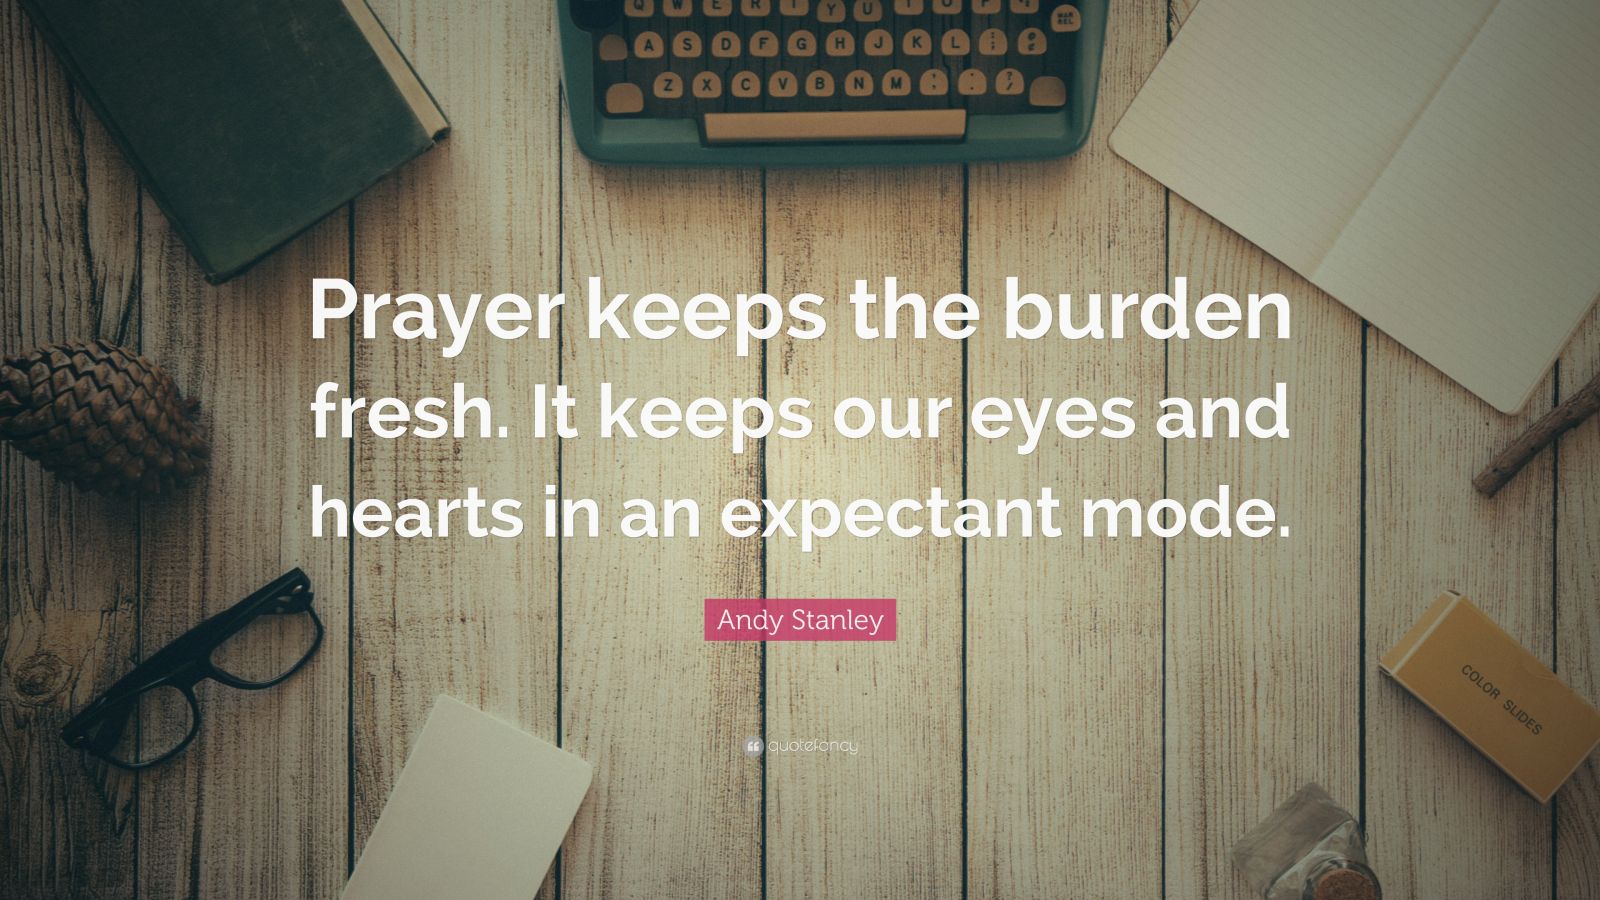 Andy Stanley Quote: “Prayer keeps the burden fresh. It keeps our eyes ...